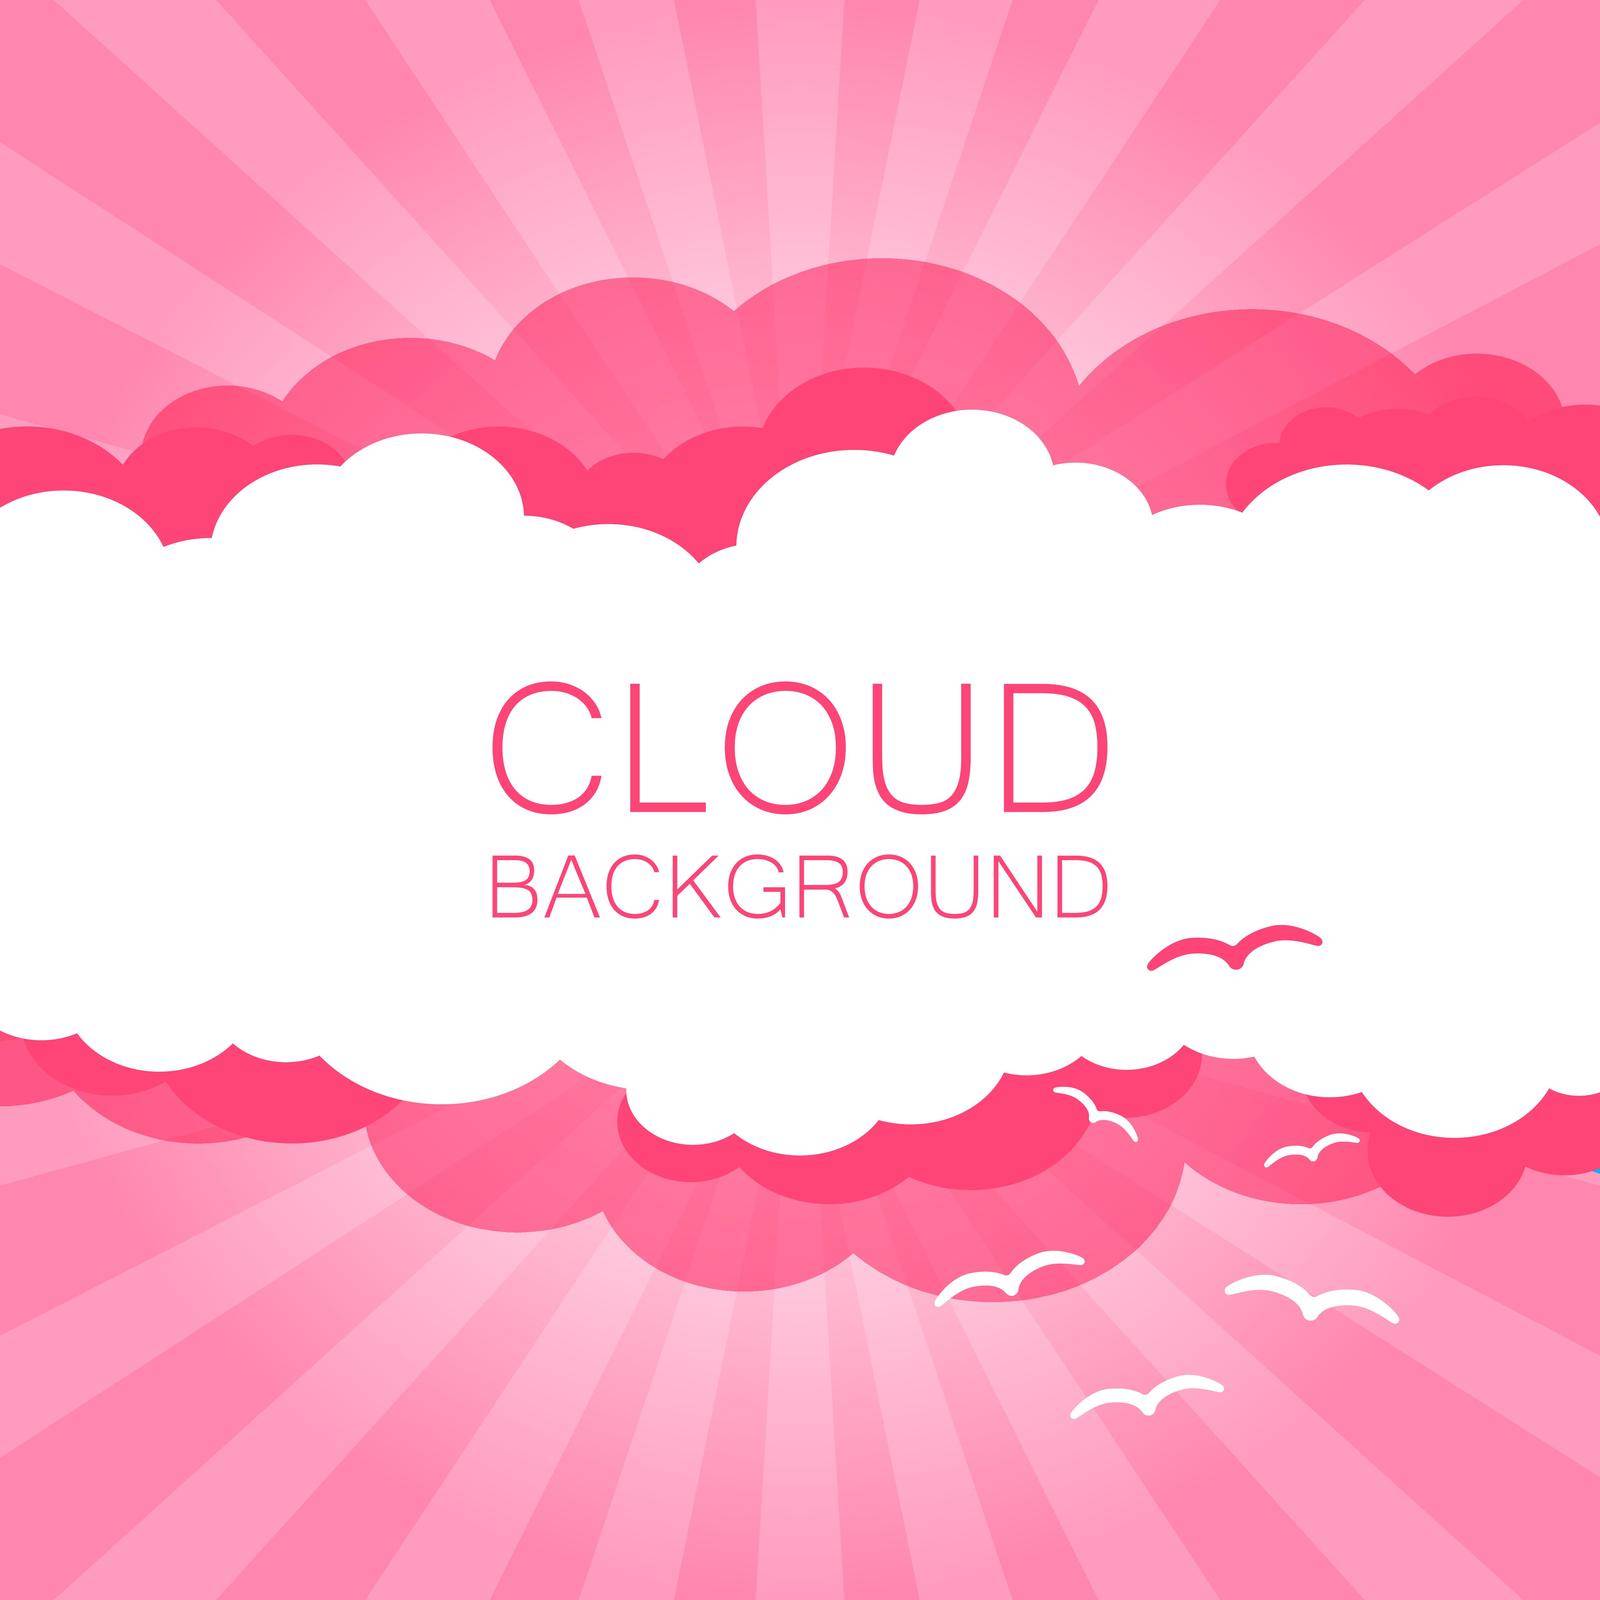 Clouds in the sky with sun rays. Flat vector illustration in cartoon style. Pink colorful sunset background. by LysenkoA